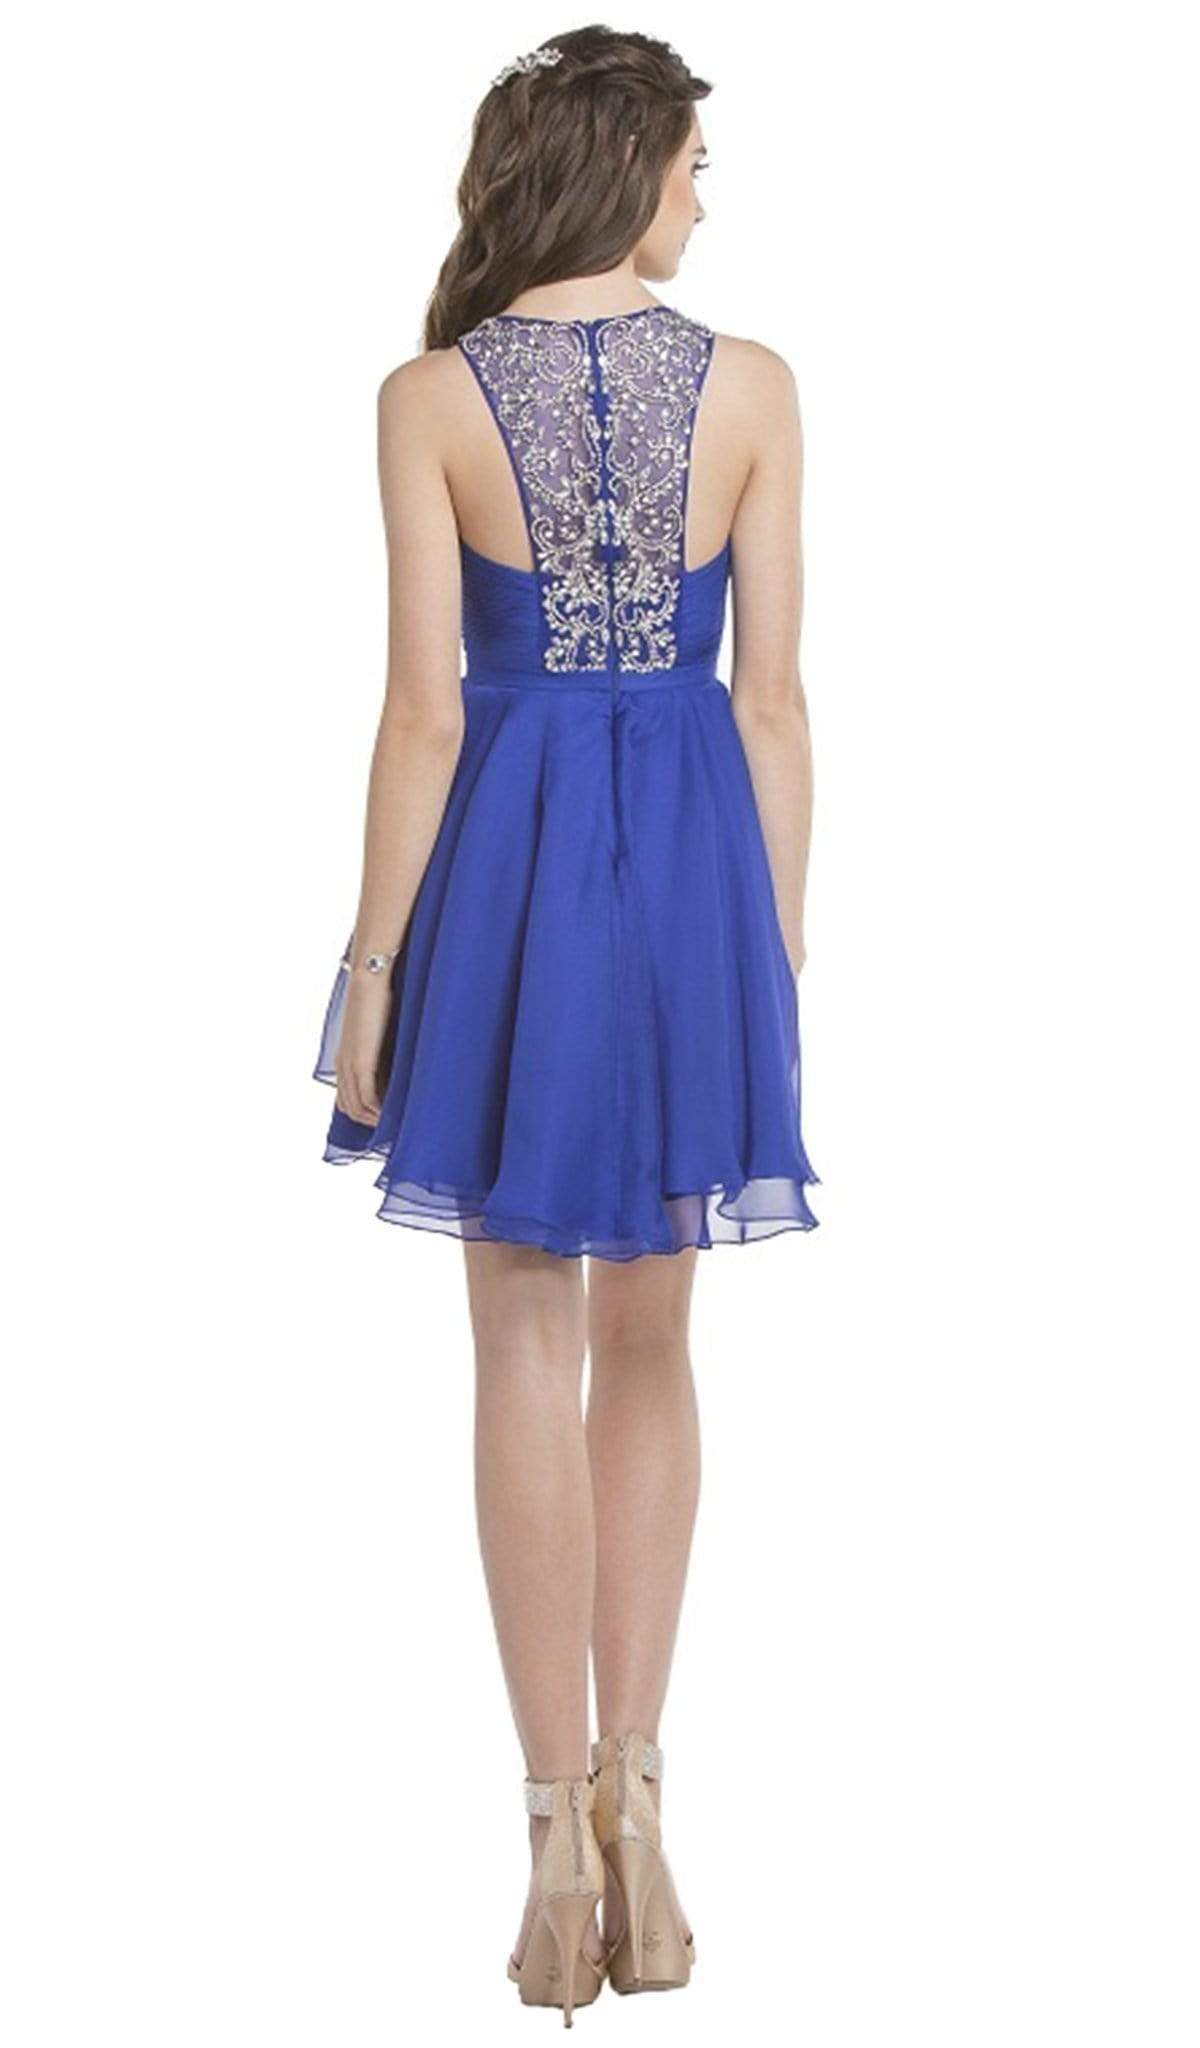 Bedazzled Halter Neck Homecoming A-line Dress Cocktail Dresses